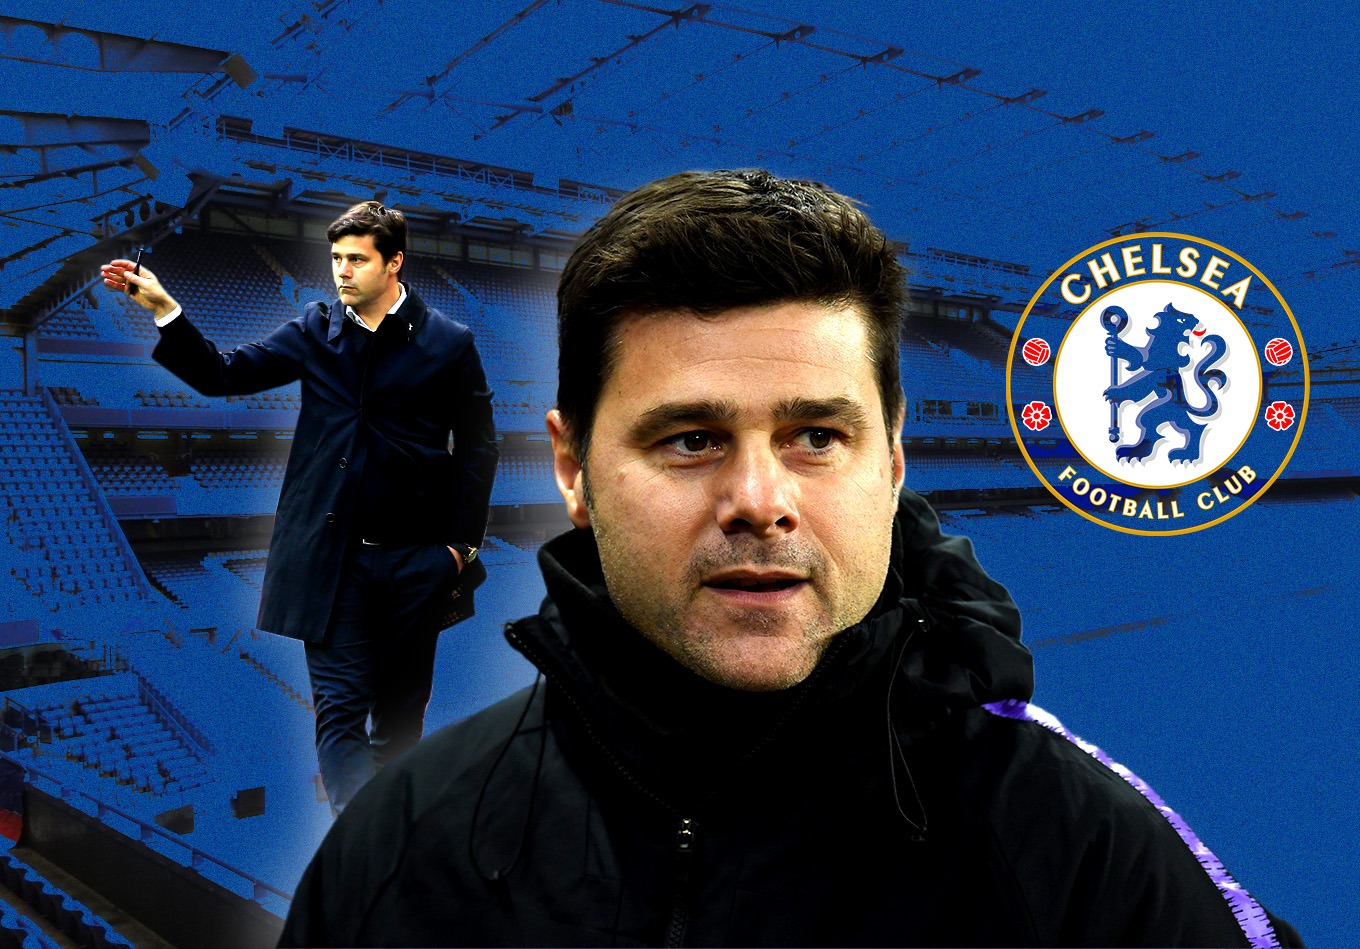 Pochettino to Chelsea – How Would It Work? | The Analyst